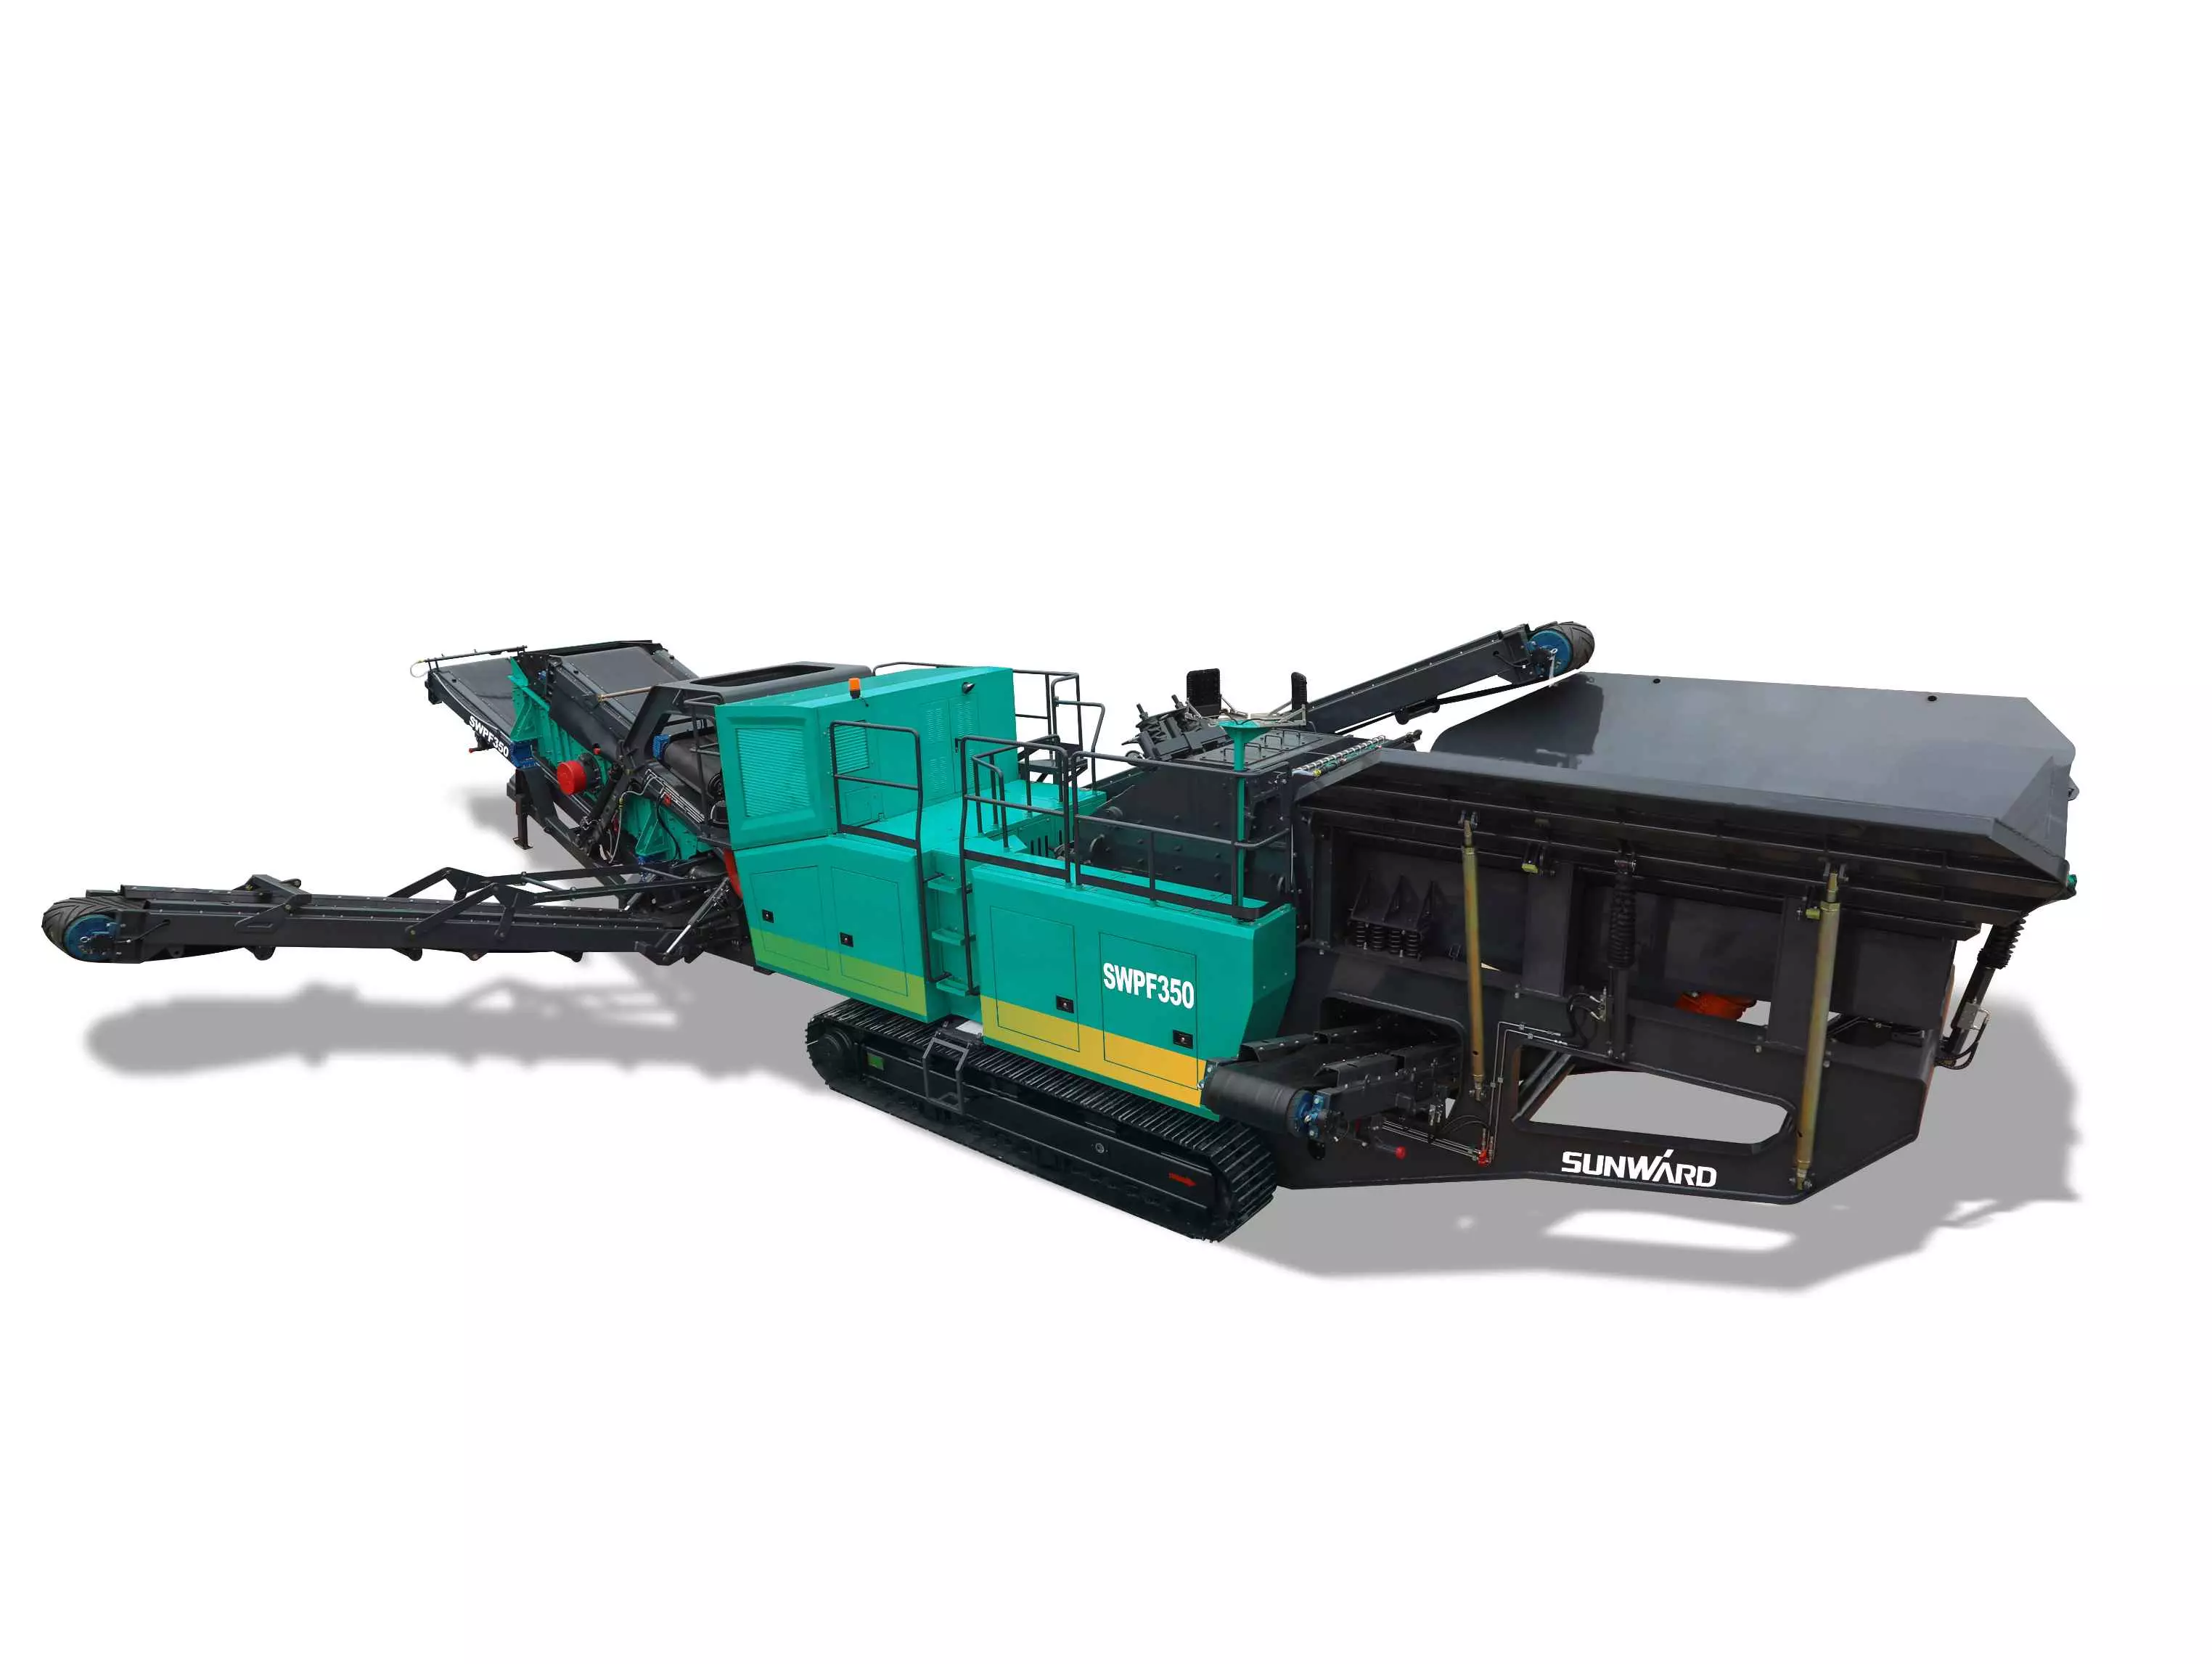 Why do we need a crawler impact crushing station in our production?